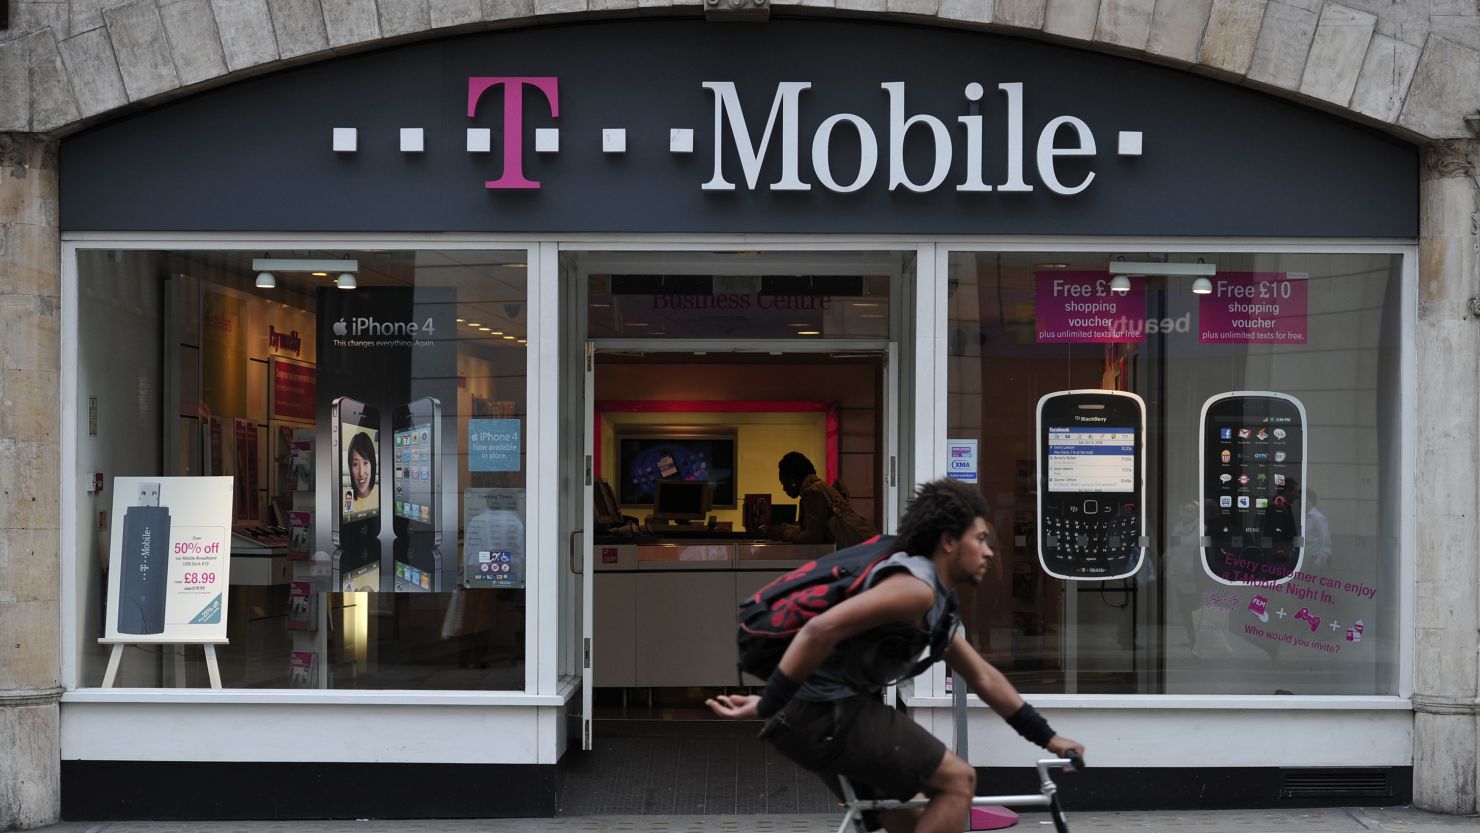 Under its new $10-a-month JUMP! plan, T-Mobile lets users upgrade their phones up to twice a year.